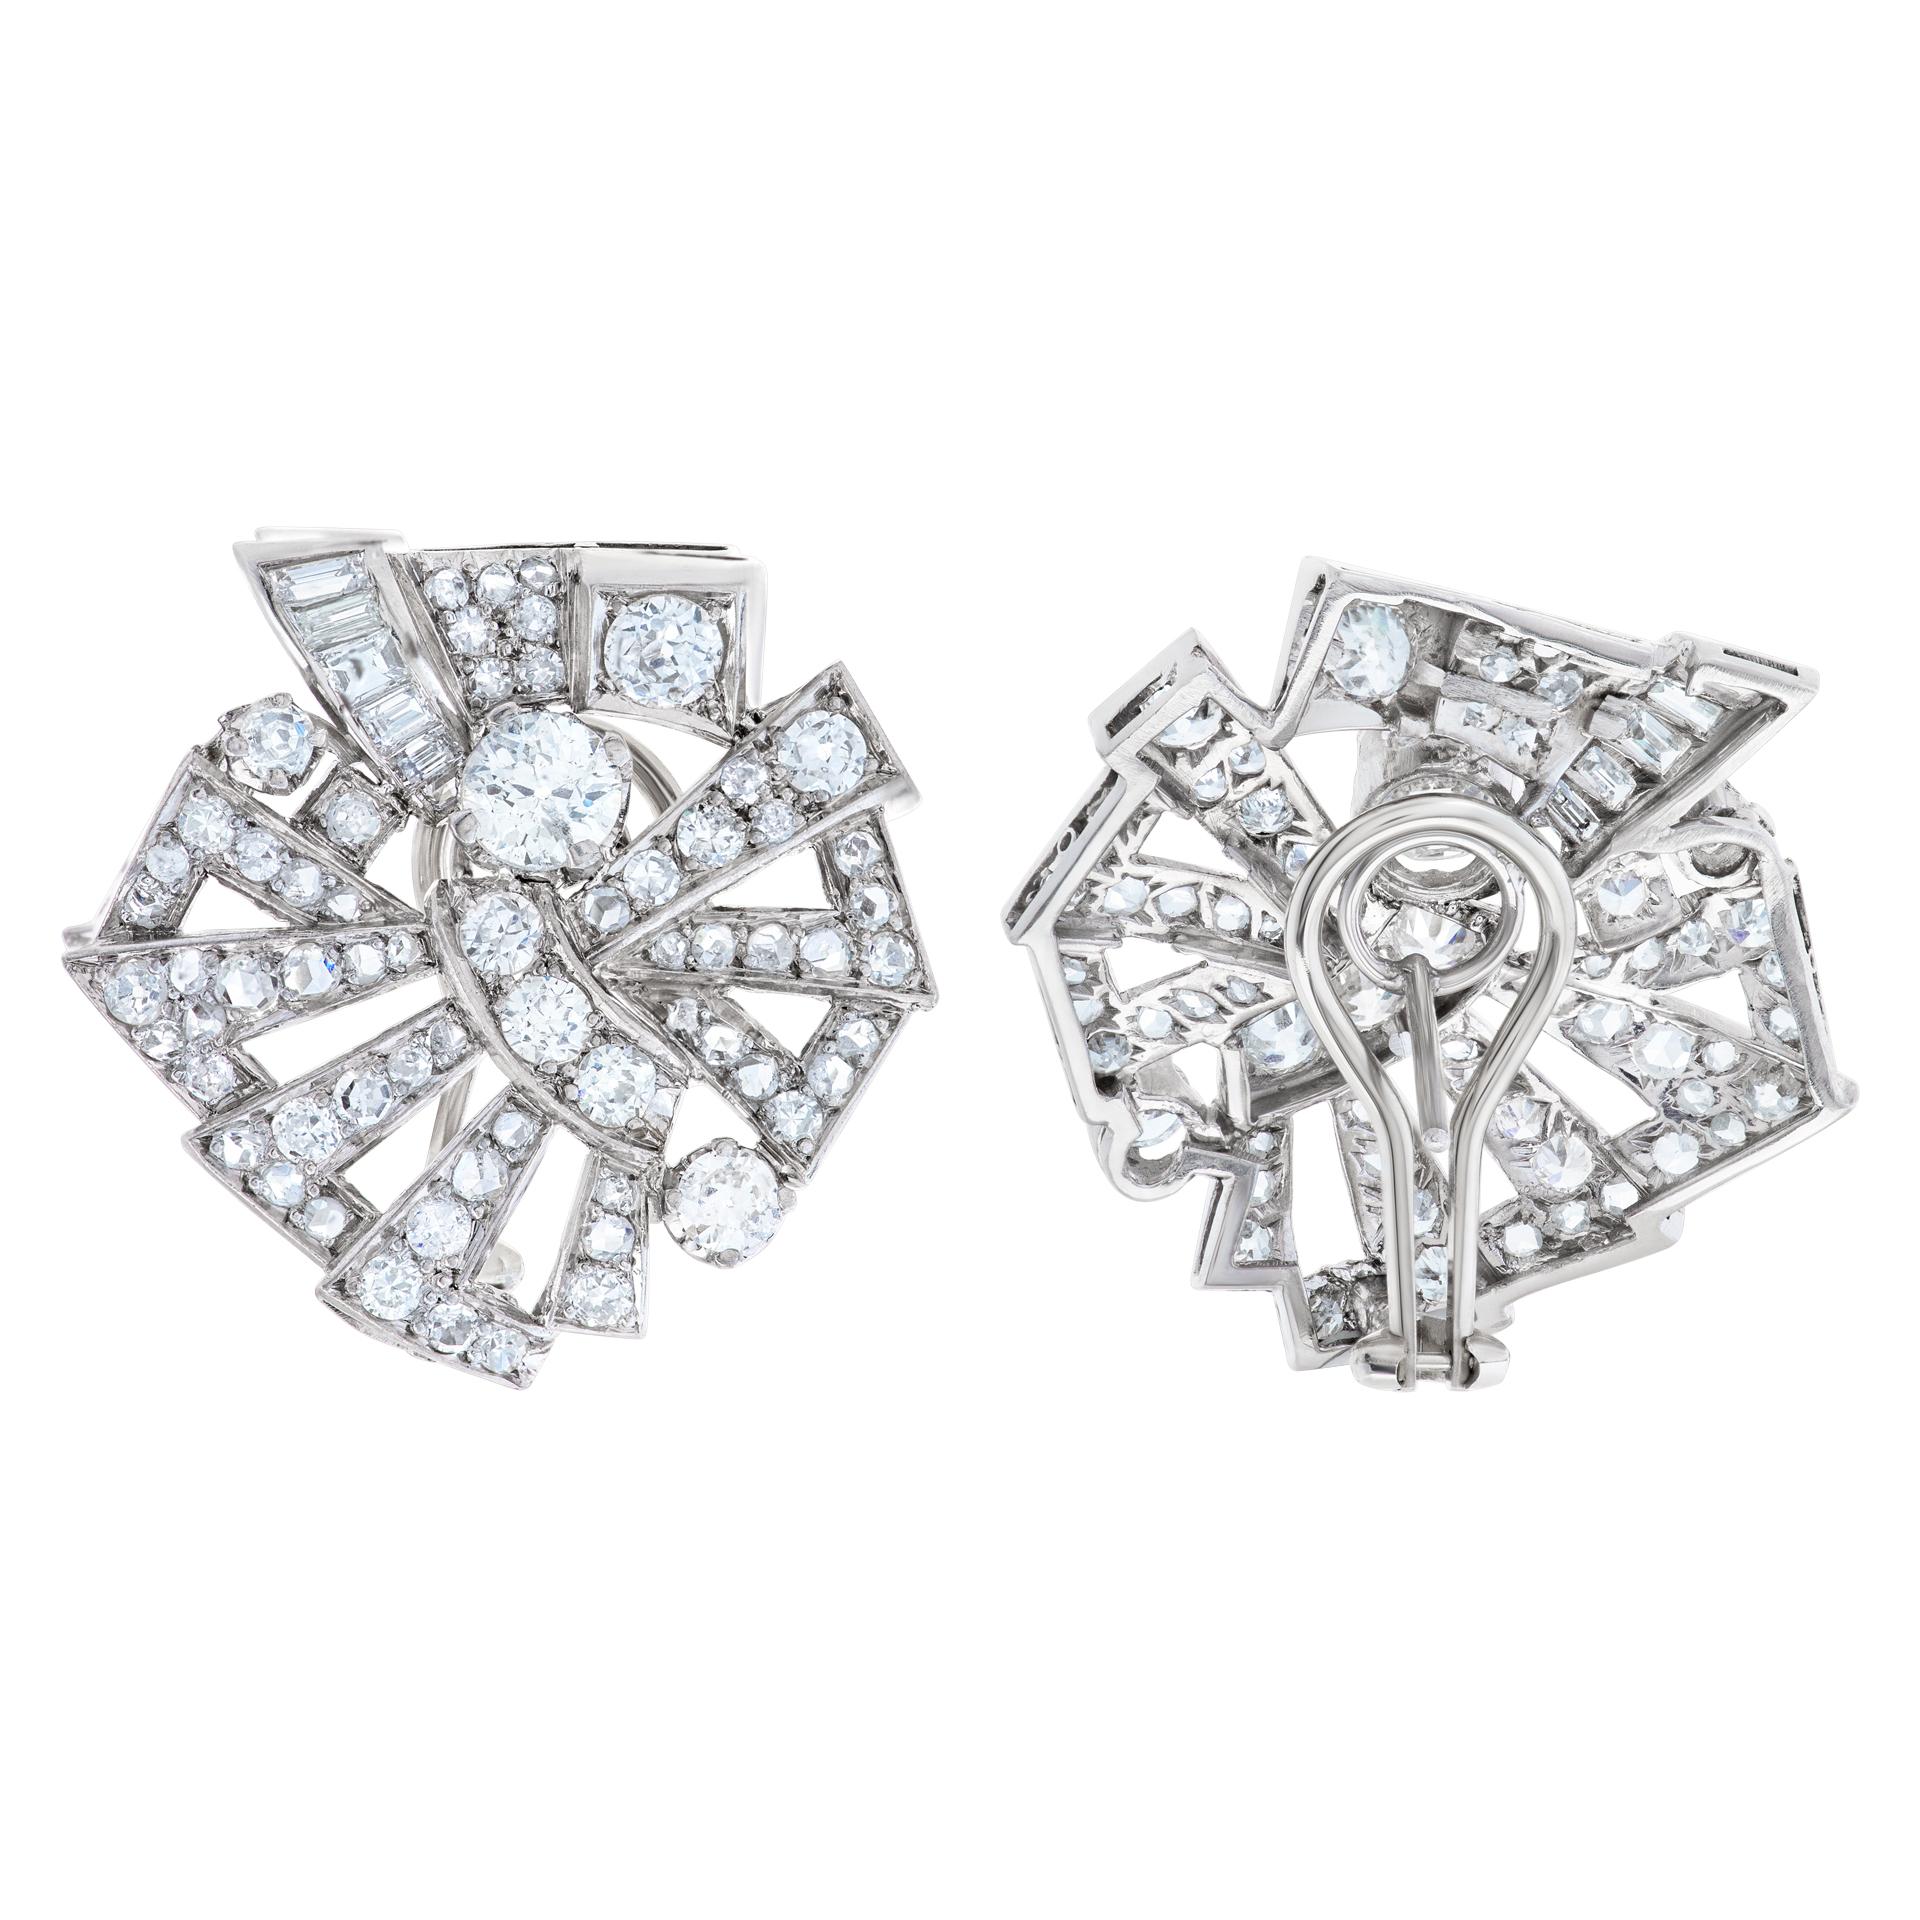 Art Deco Style Earrings With over 5 carats of Diamonds Set In Platinum In Excellent Condition For Sale In Surfside, FL